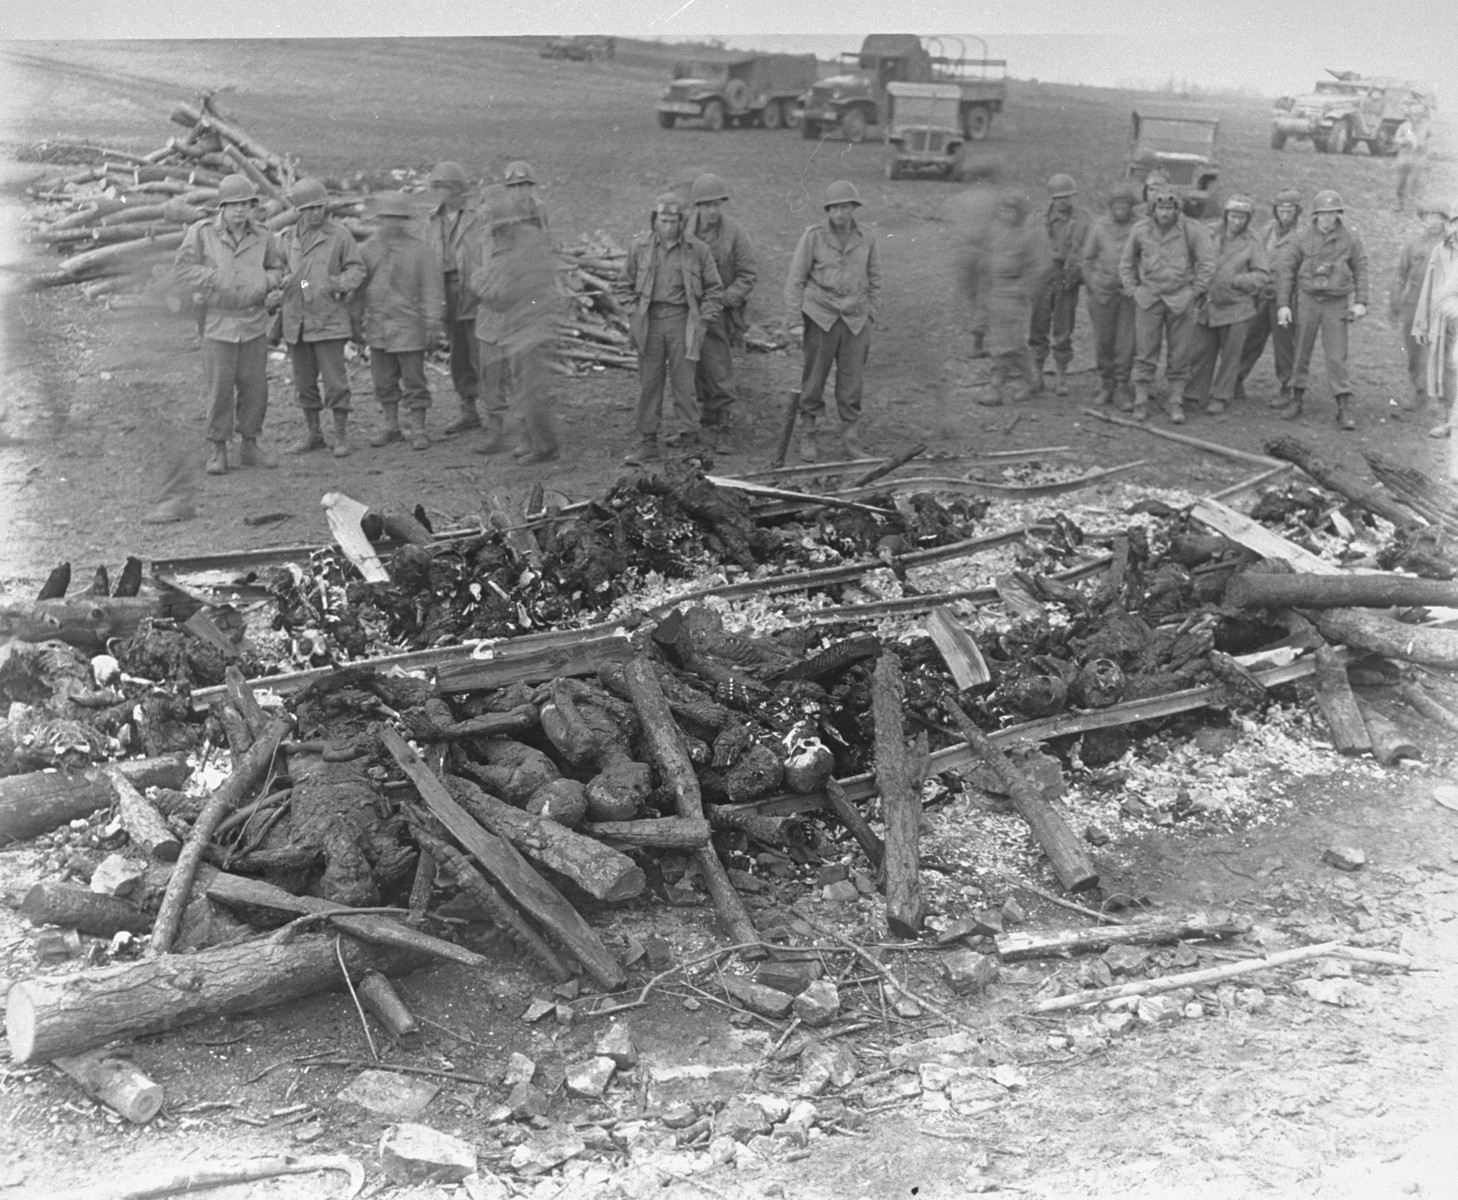 While on an inspection tour of the newly liberated Ohrdruf concentration camp, American soldiers view the charred remains of prisoners that were burned upon a section of railroad track during the evacuation of the camp.

The original caption reads "The charred remains of burned prisoners are shown shortly after capture of the area by Third U.S. Army troops.  The Nazis exhumed and burned 1,606 murdered victims in six days in an attempt to destroy the evidence on orders from higher headquarters."

From left those pictured are Nylan Ellsworth, George Stantis (second from left, tentative identification), Jack Caminer (fifth from left with goggles), a German-Jewish immigrant, who served in military intelligence.  The man standing alone in the middle, eighth from the left, has been identifed as Staff Sergeant  Maynard B. Cohen or Americo Venuto or Richard Wolff.  Captain Ralph Kopansky is pictured on the far right, with a camera around his neck.